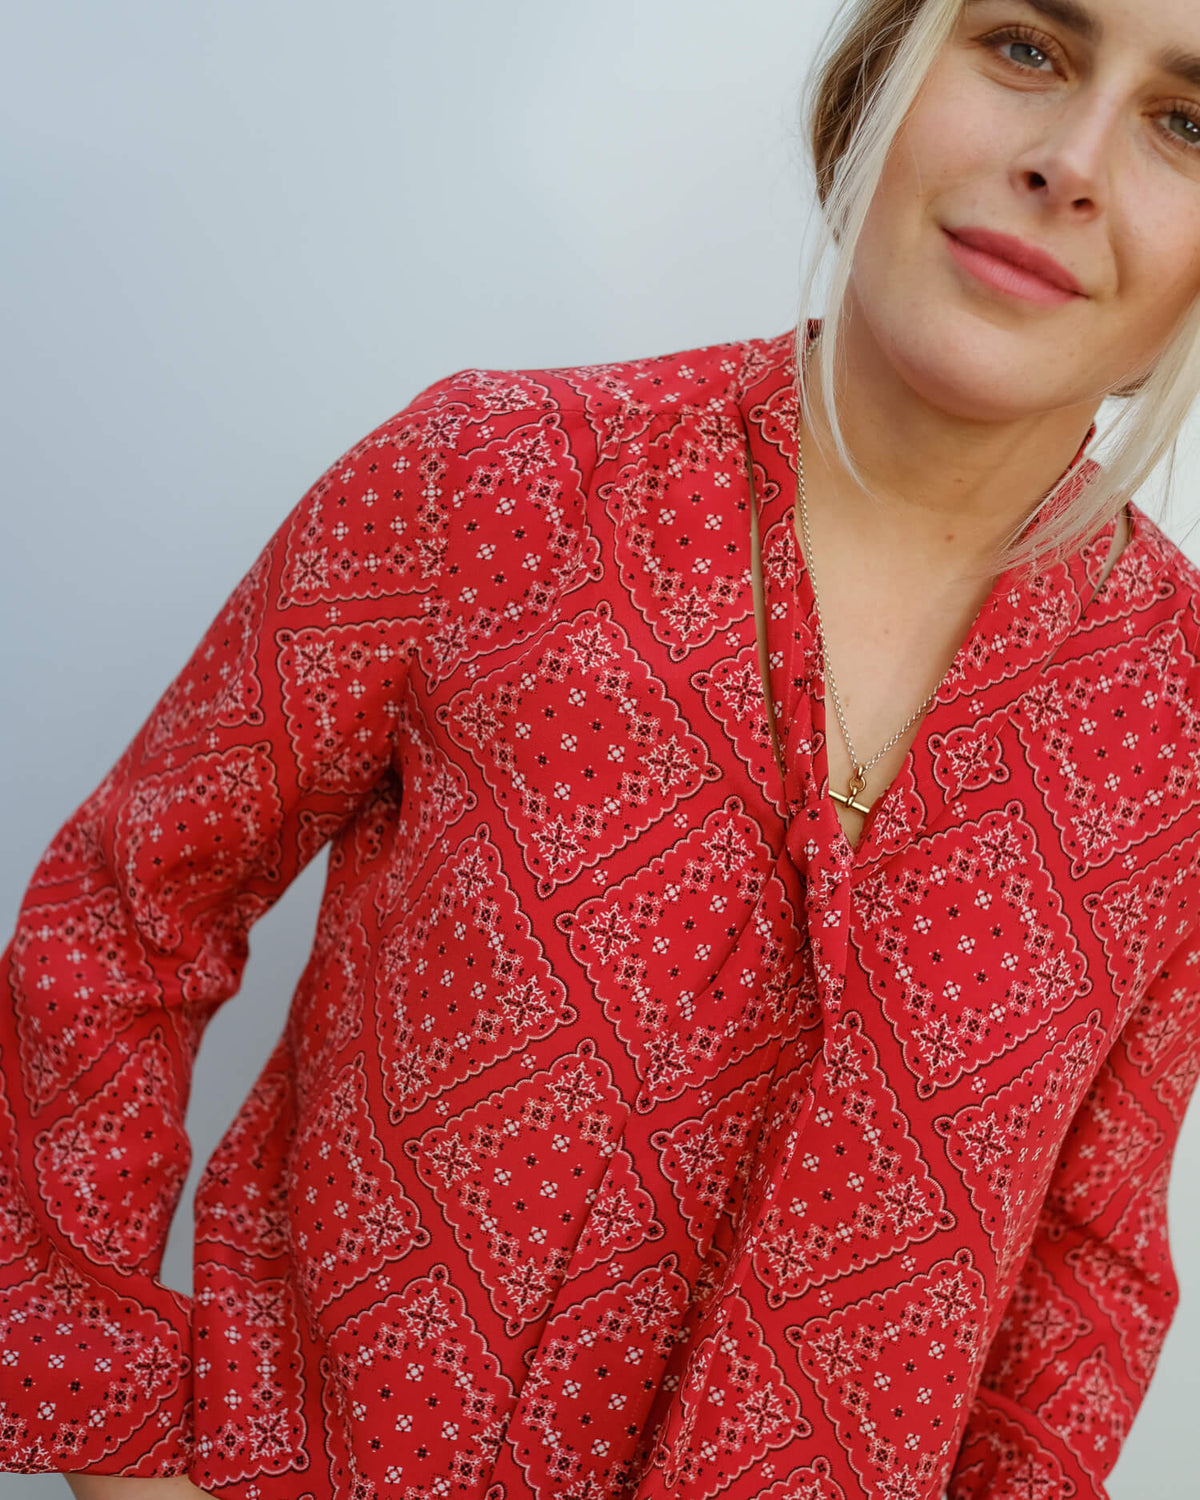 RIXO Moss in scarf floral red